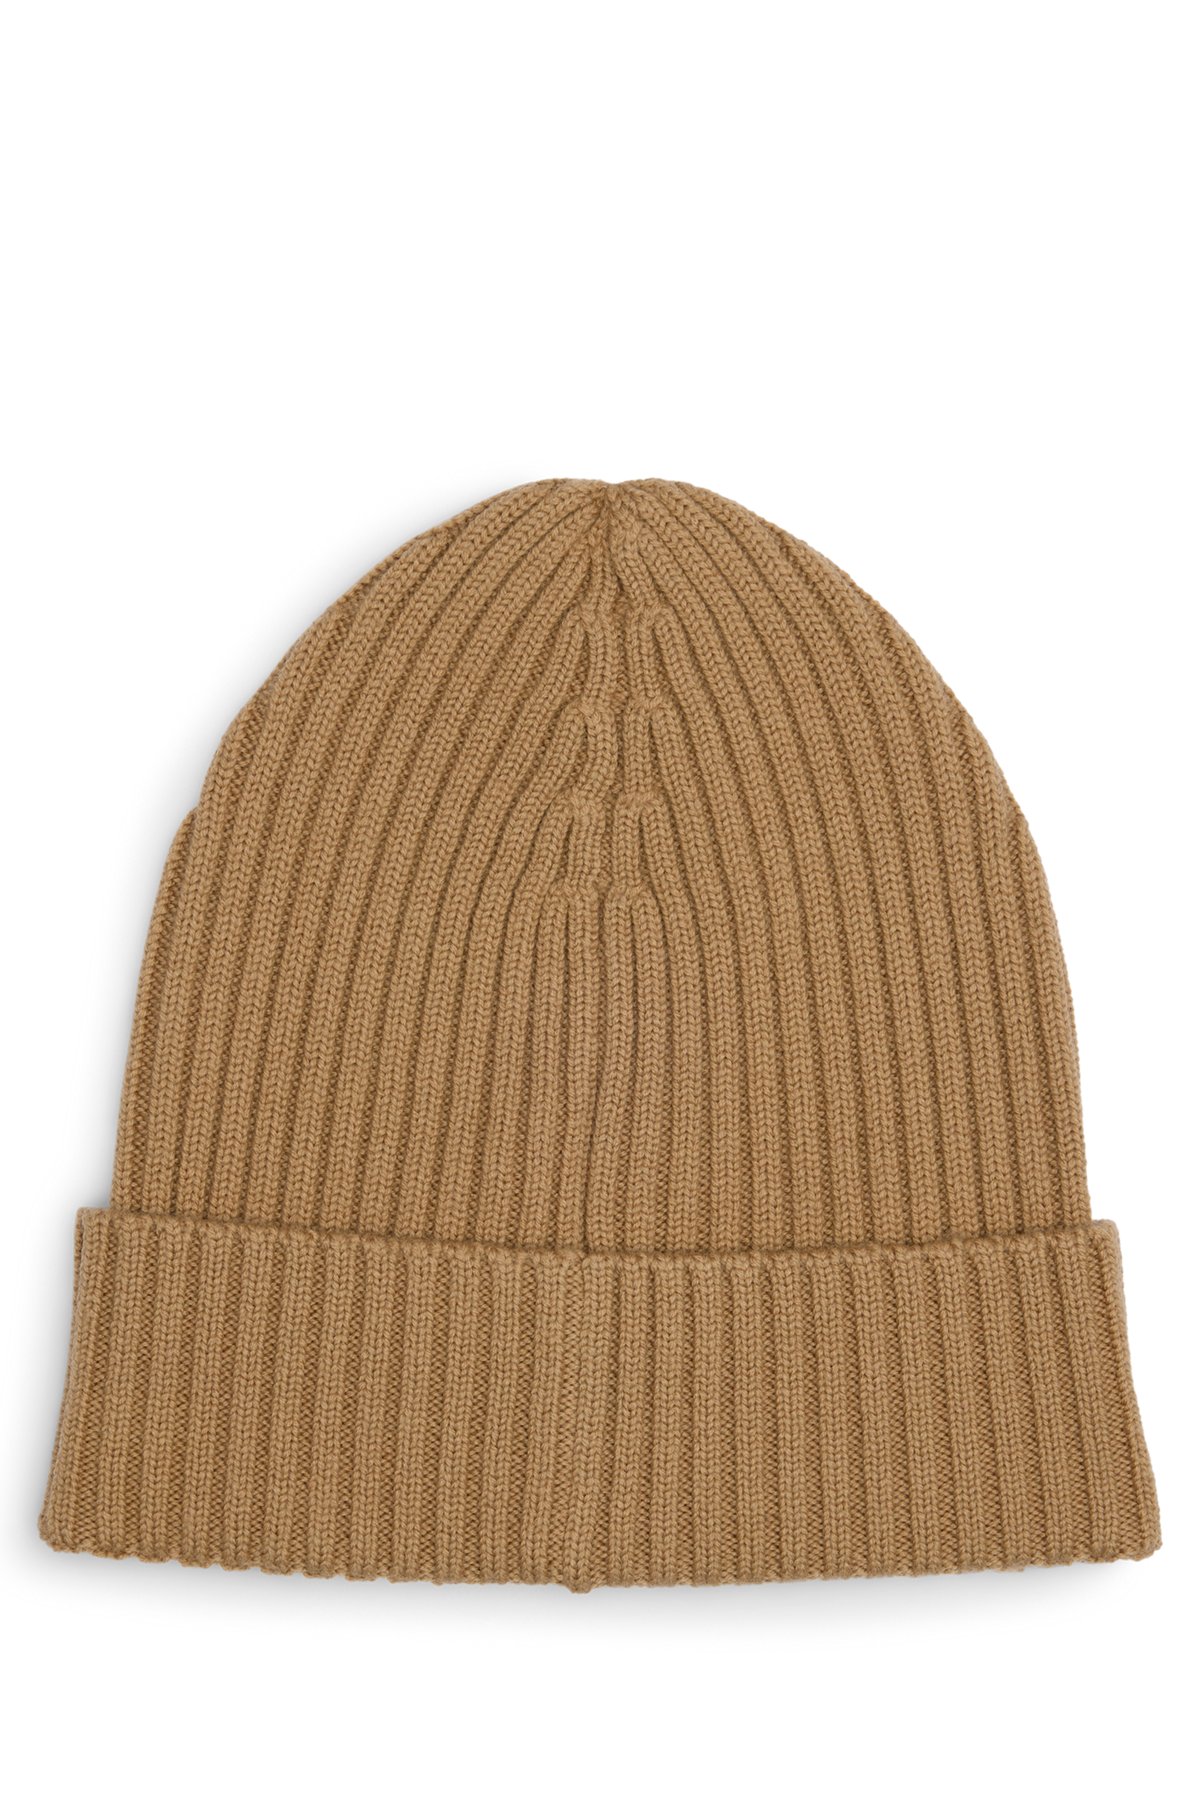 BOSS - Logo-embroidered rib-knit beanie hat in virgin wool